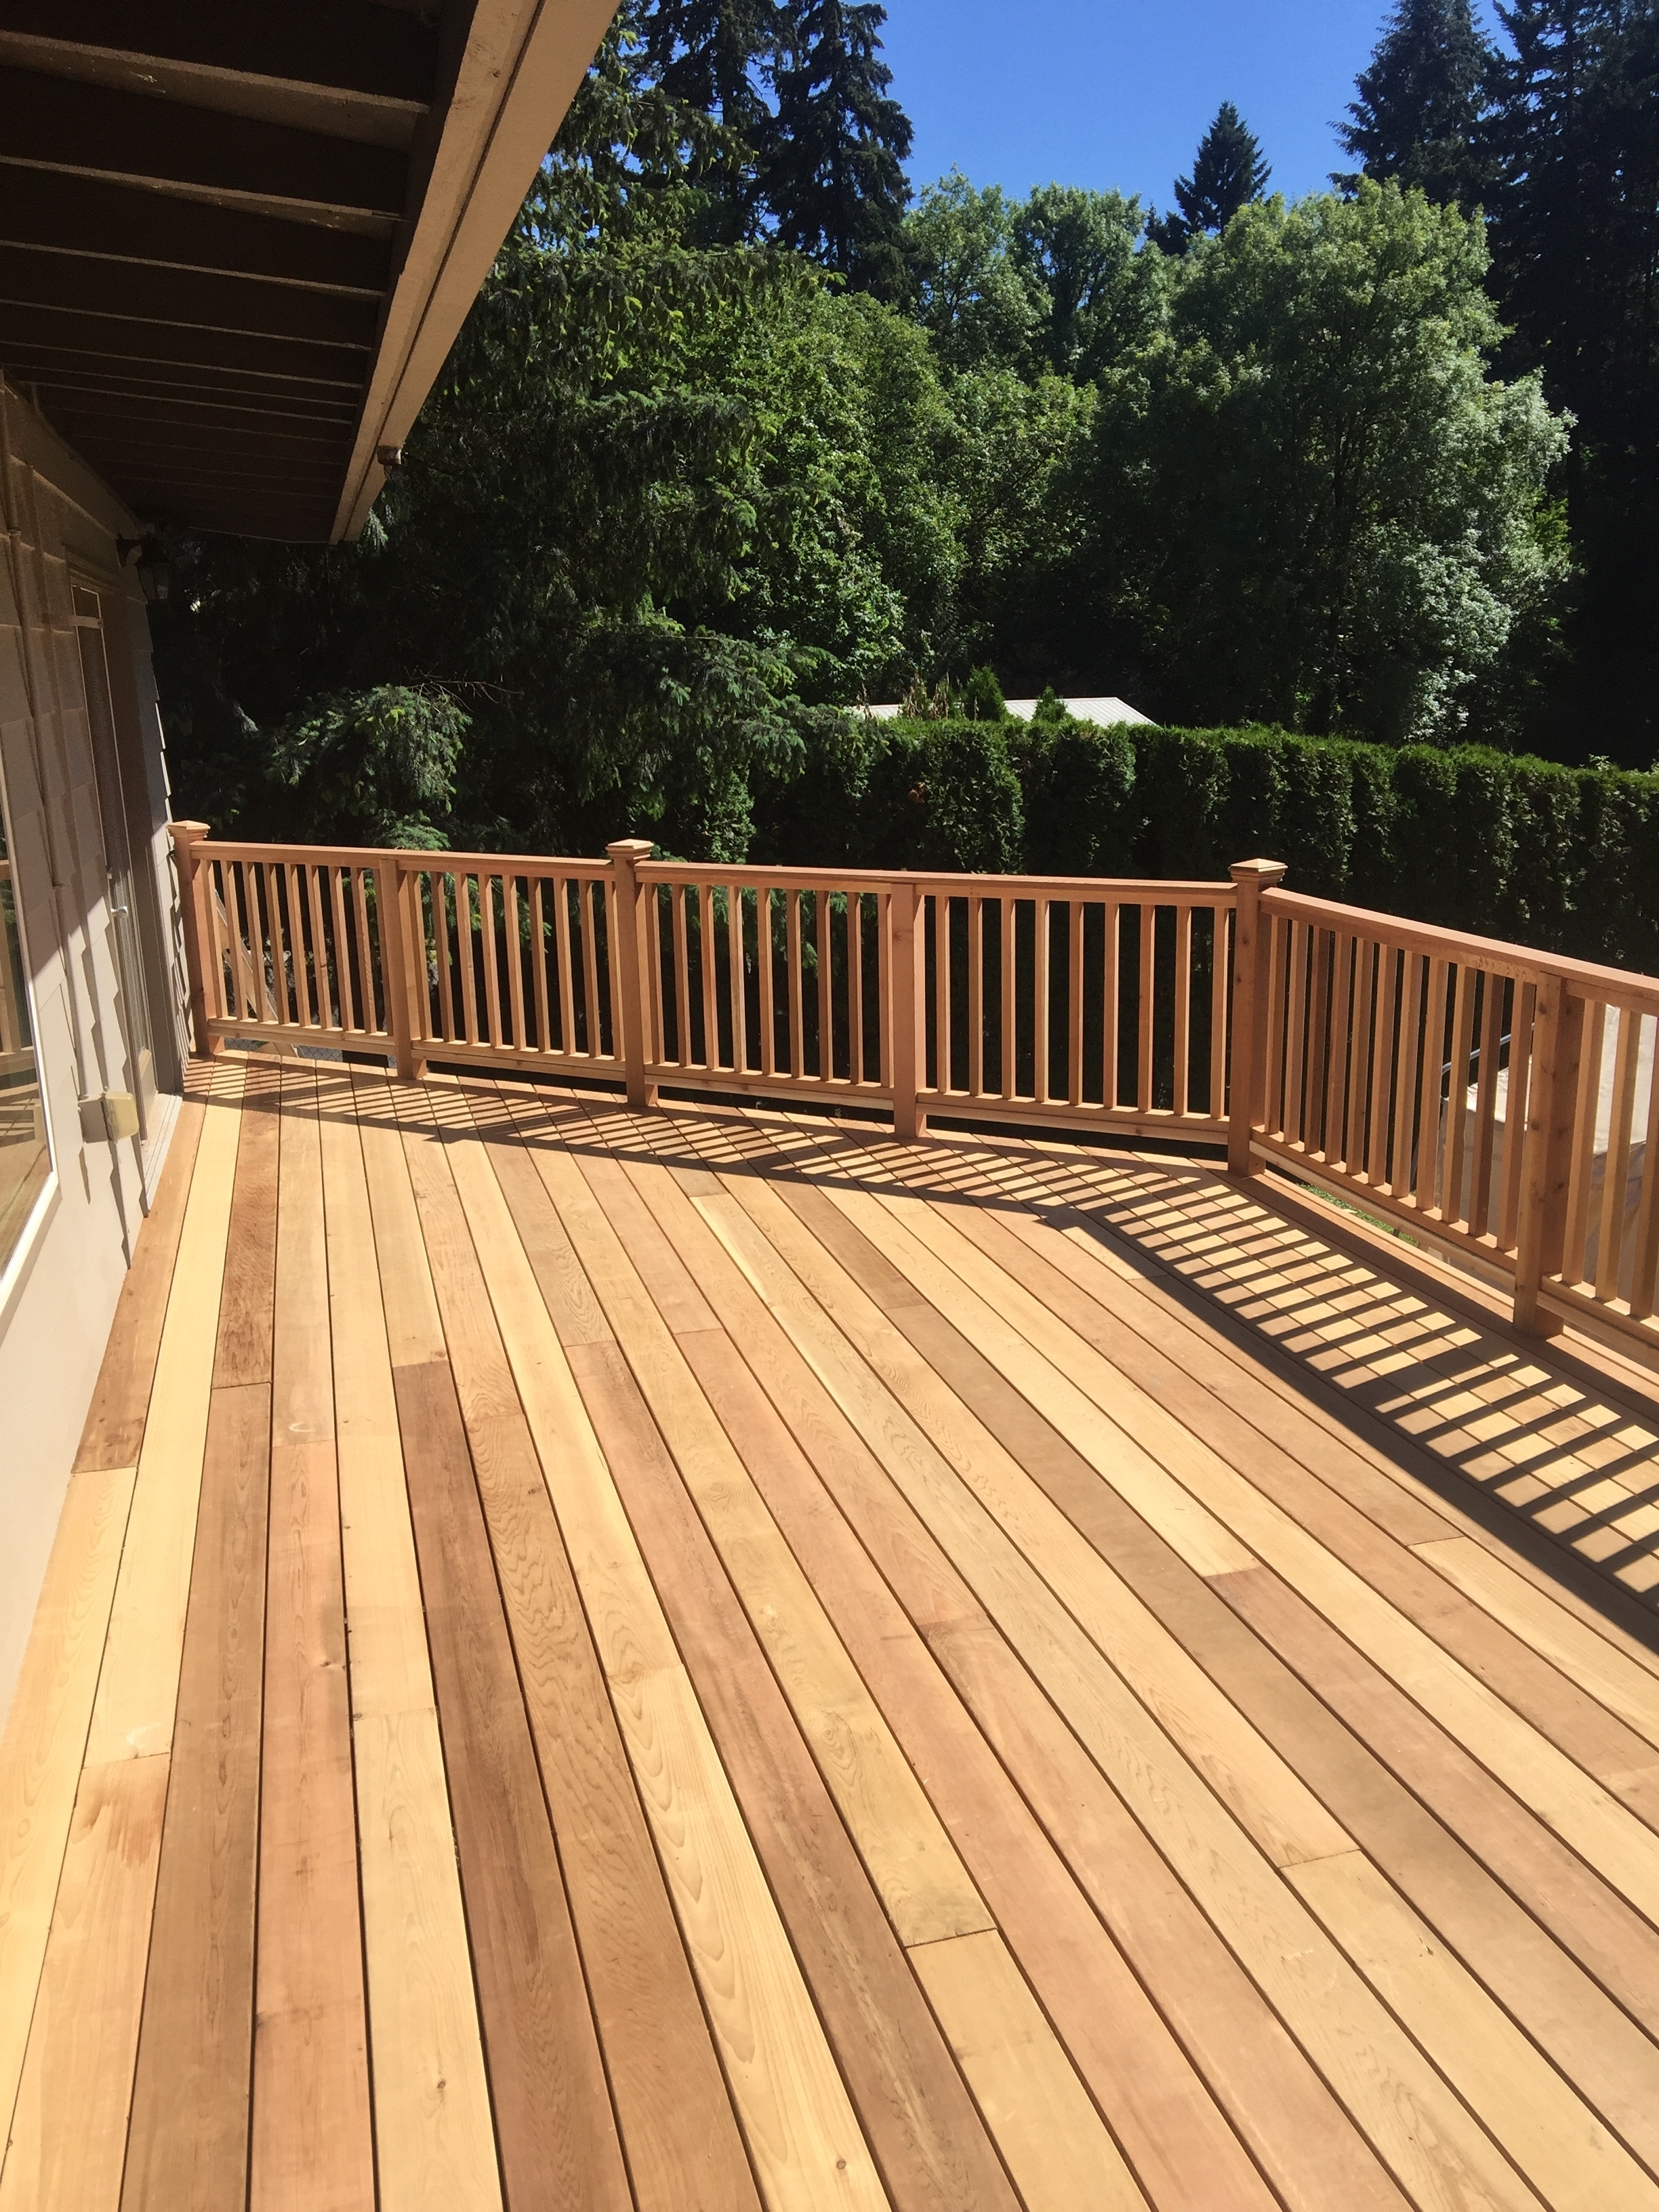 This could be your deck